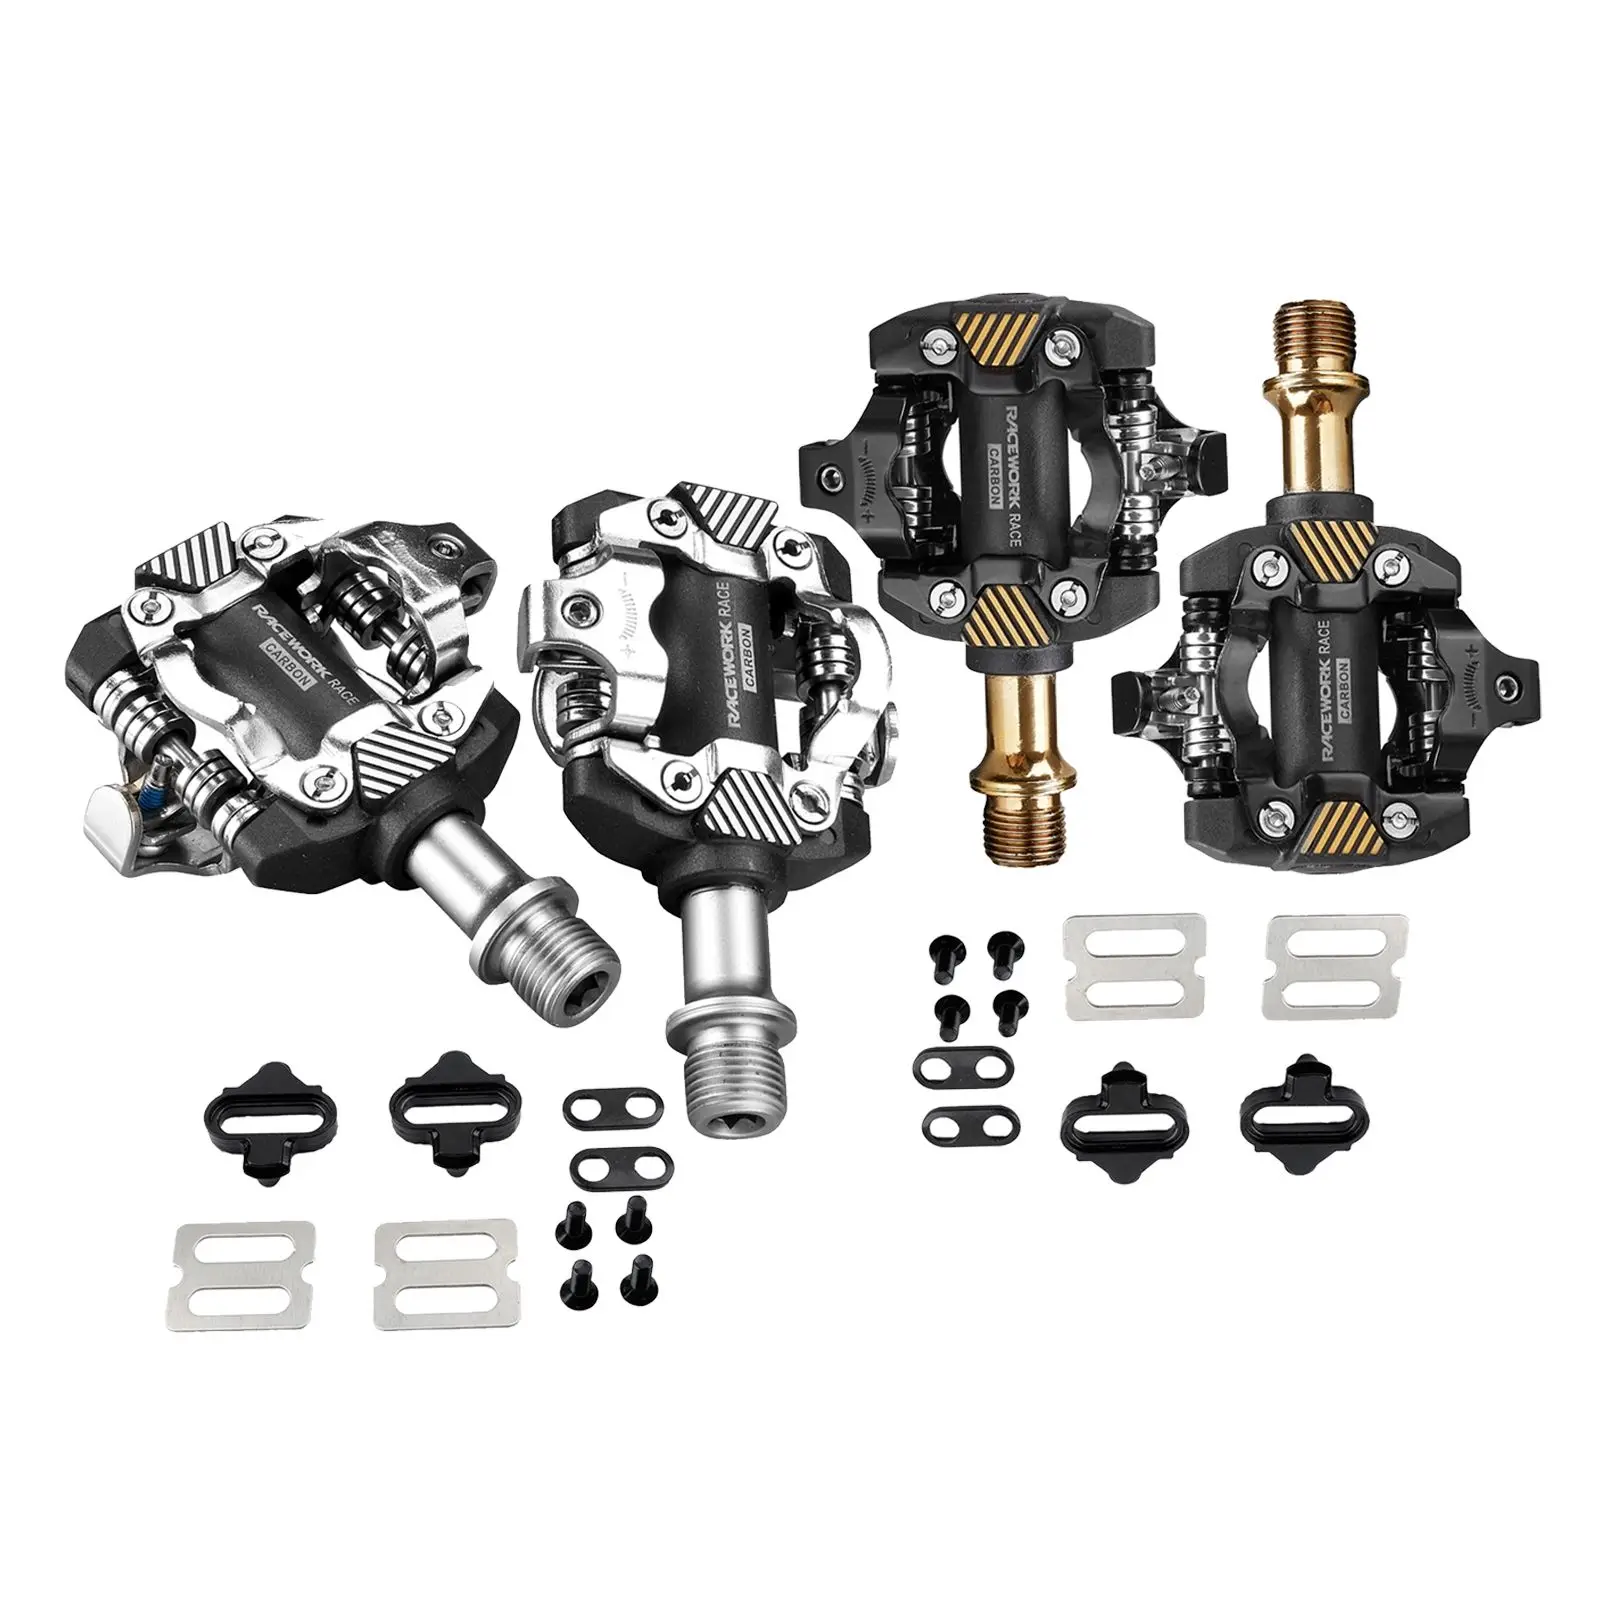 

Bike Pedals Cleats Set Locking MTB Bicycle DU Bearings Clipless Pedal Accessories